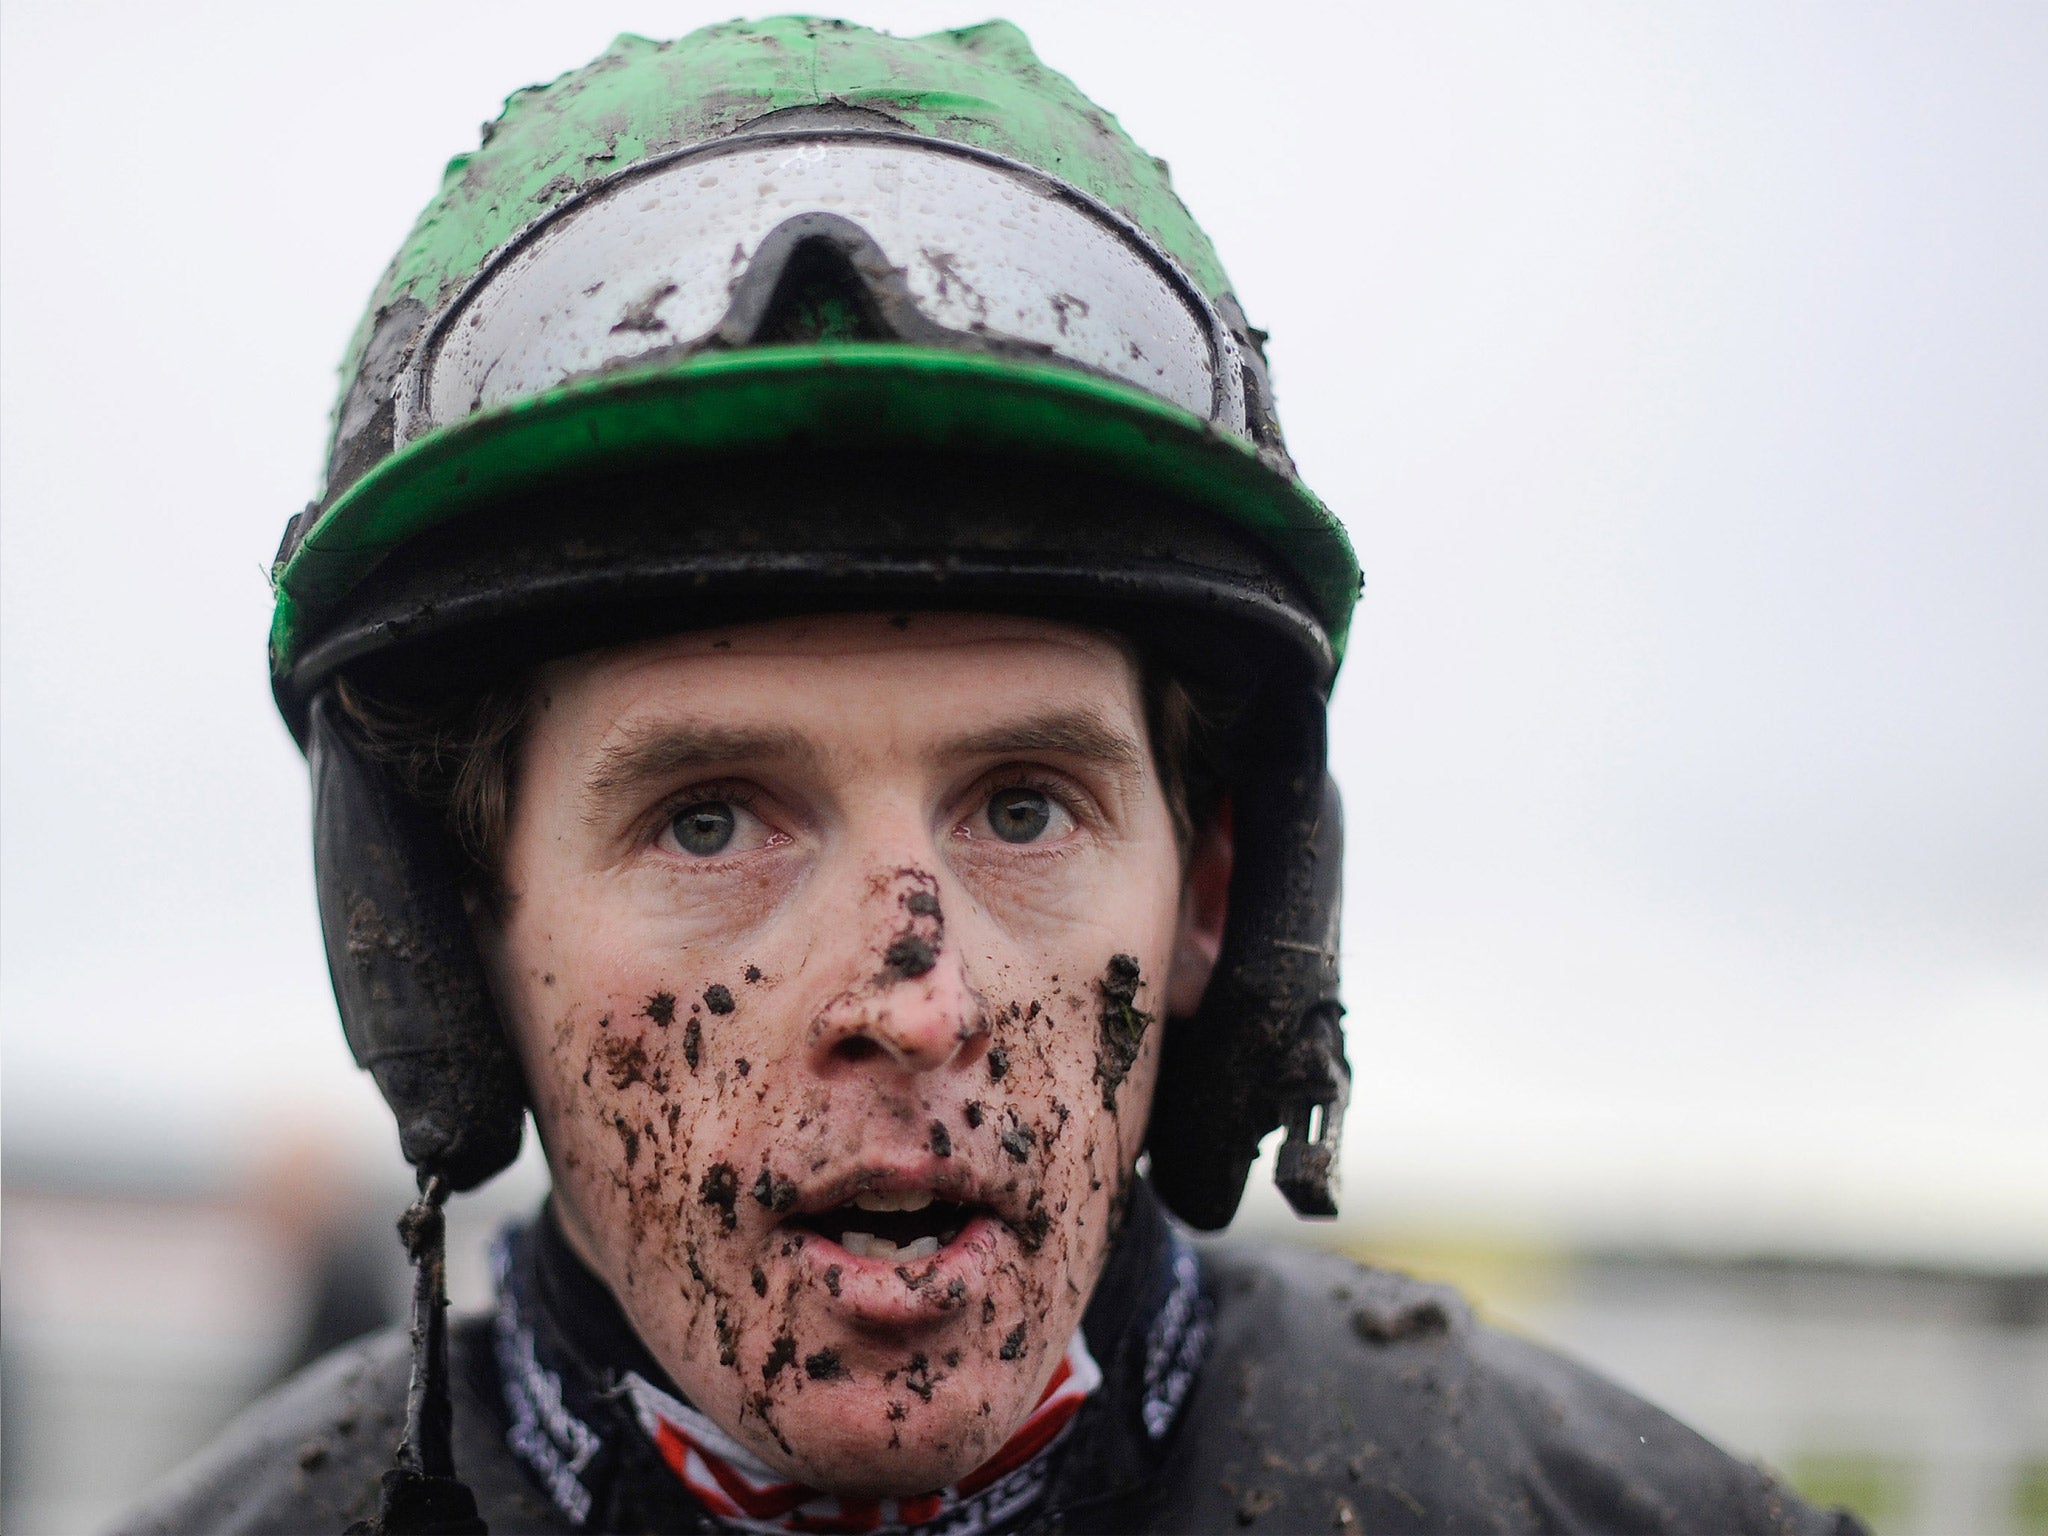 Jason Maguire: the jockey told trainer Donald McCain that Peddlers Cross was merely idling